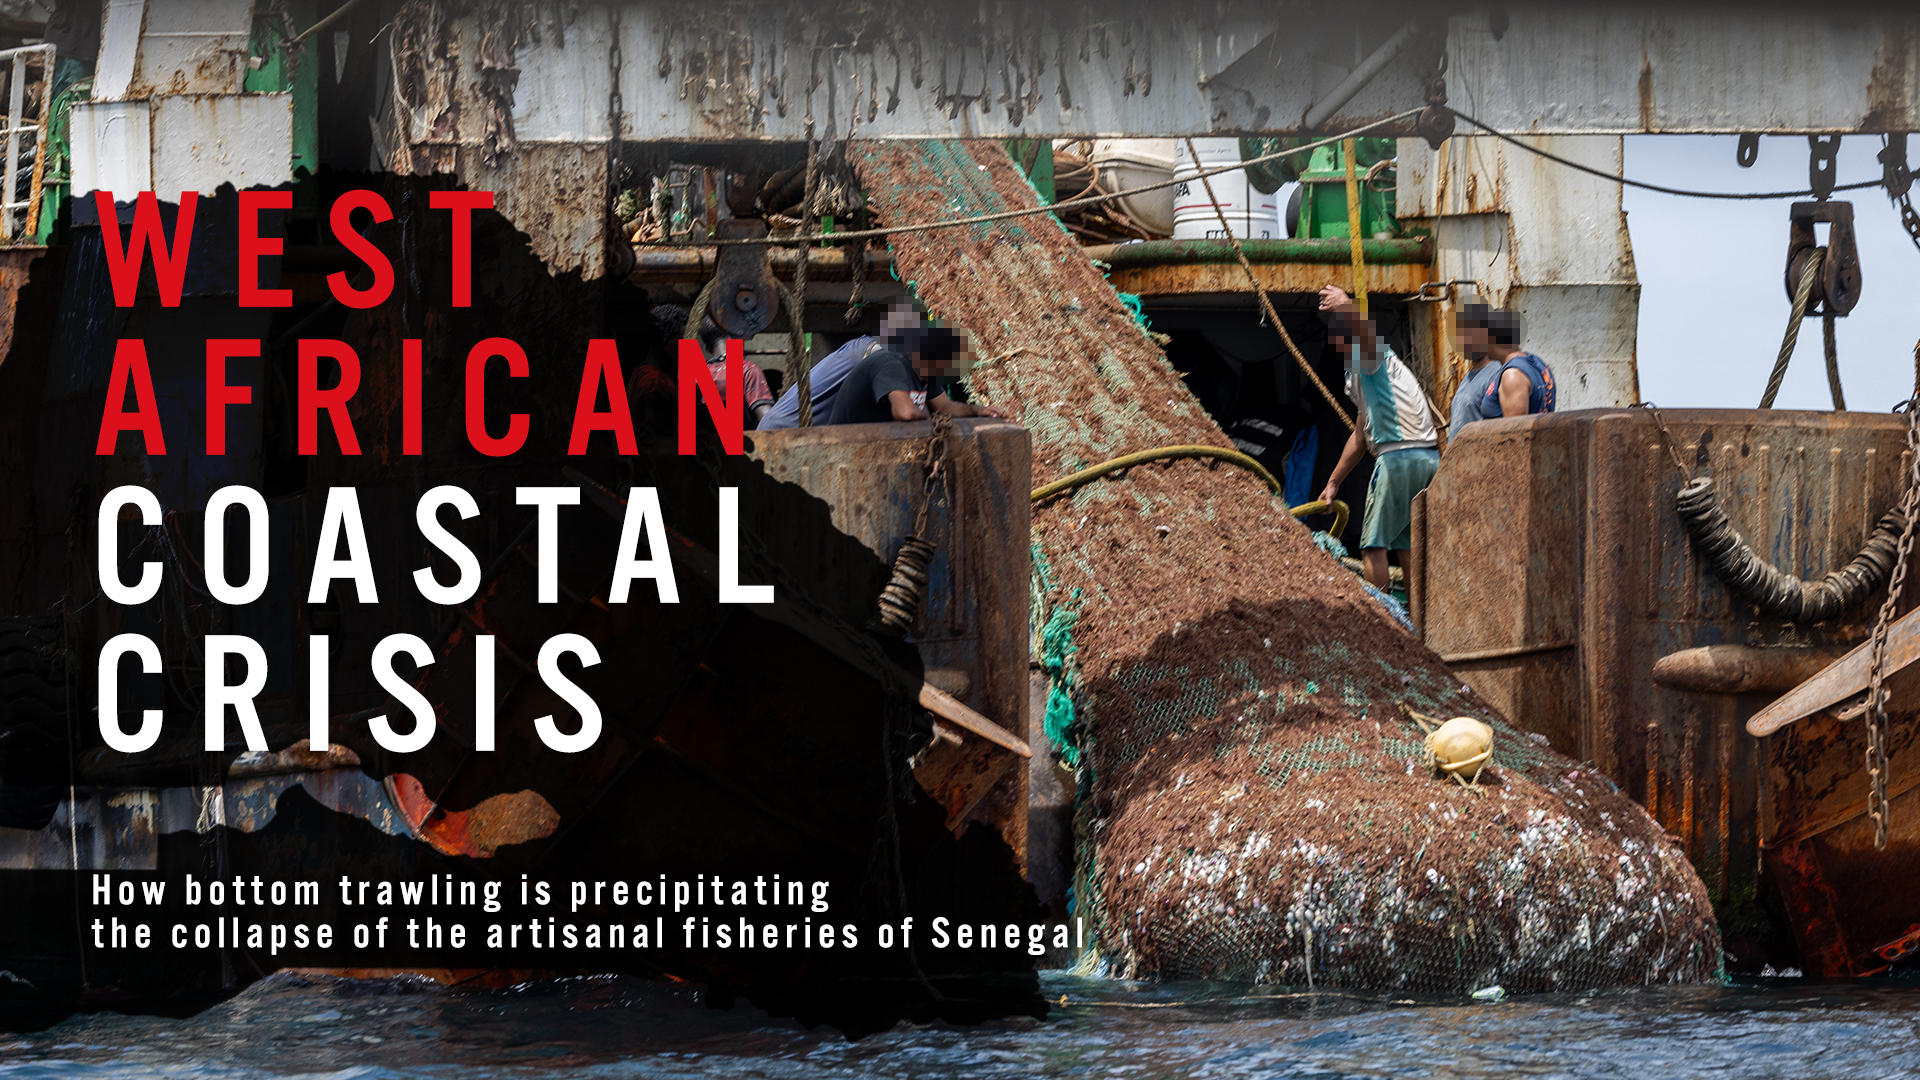 At the tipping point: how bottom trawling is precipitating the collapse of Senegal’s artisanal fisheries